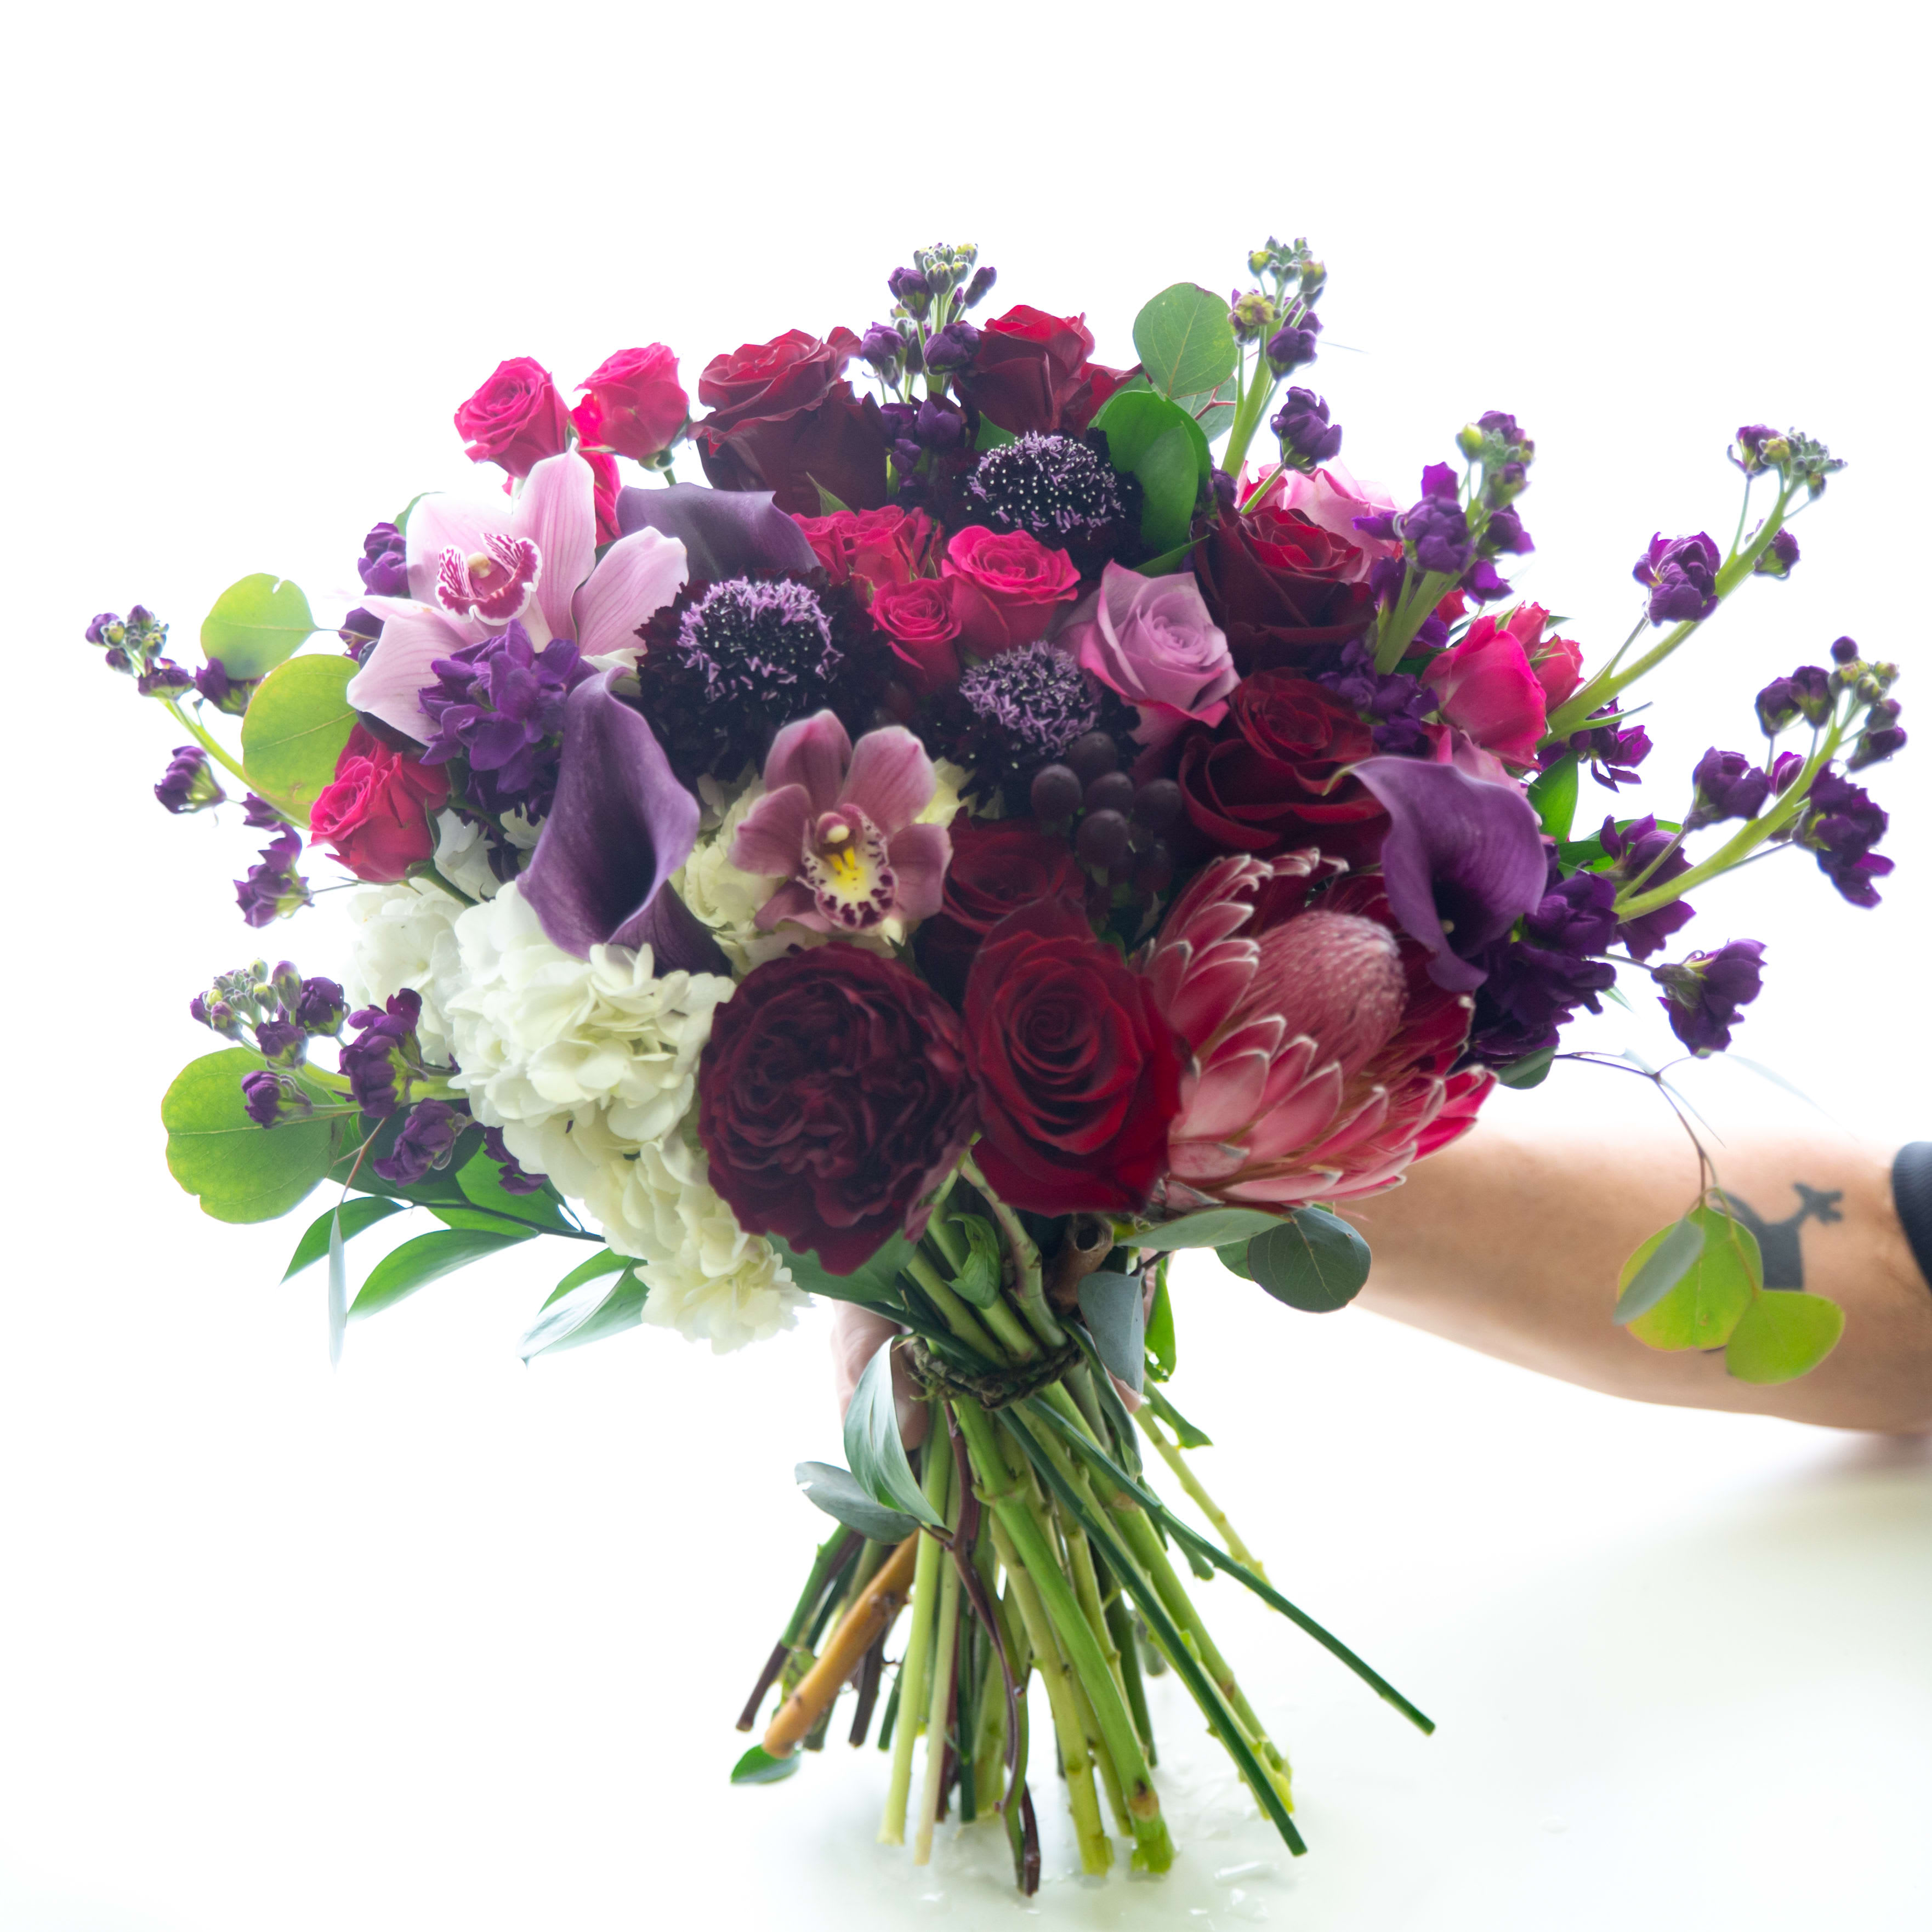 Lovers' Lane Bouquet  - Sultry bouquet of red, pink and purple toned flowers including roses, mini callas, orchids, pink proteas, purple stock and hot pink  spray roses 